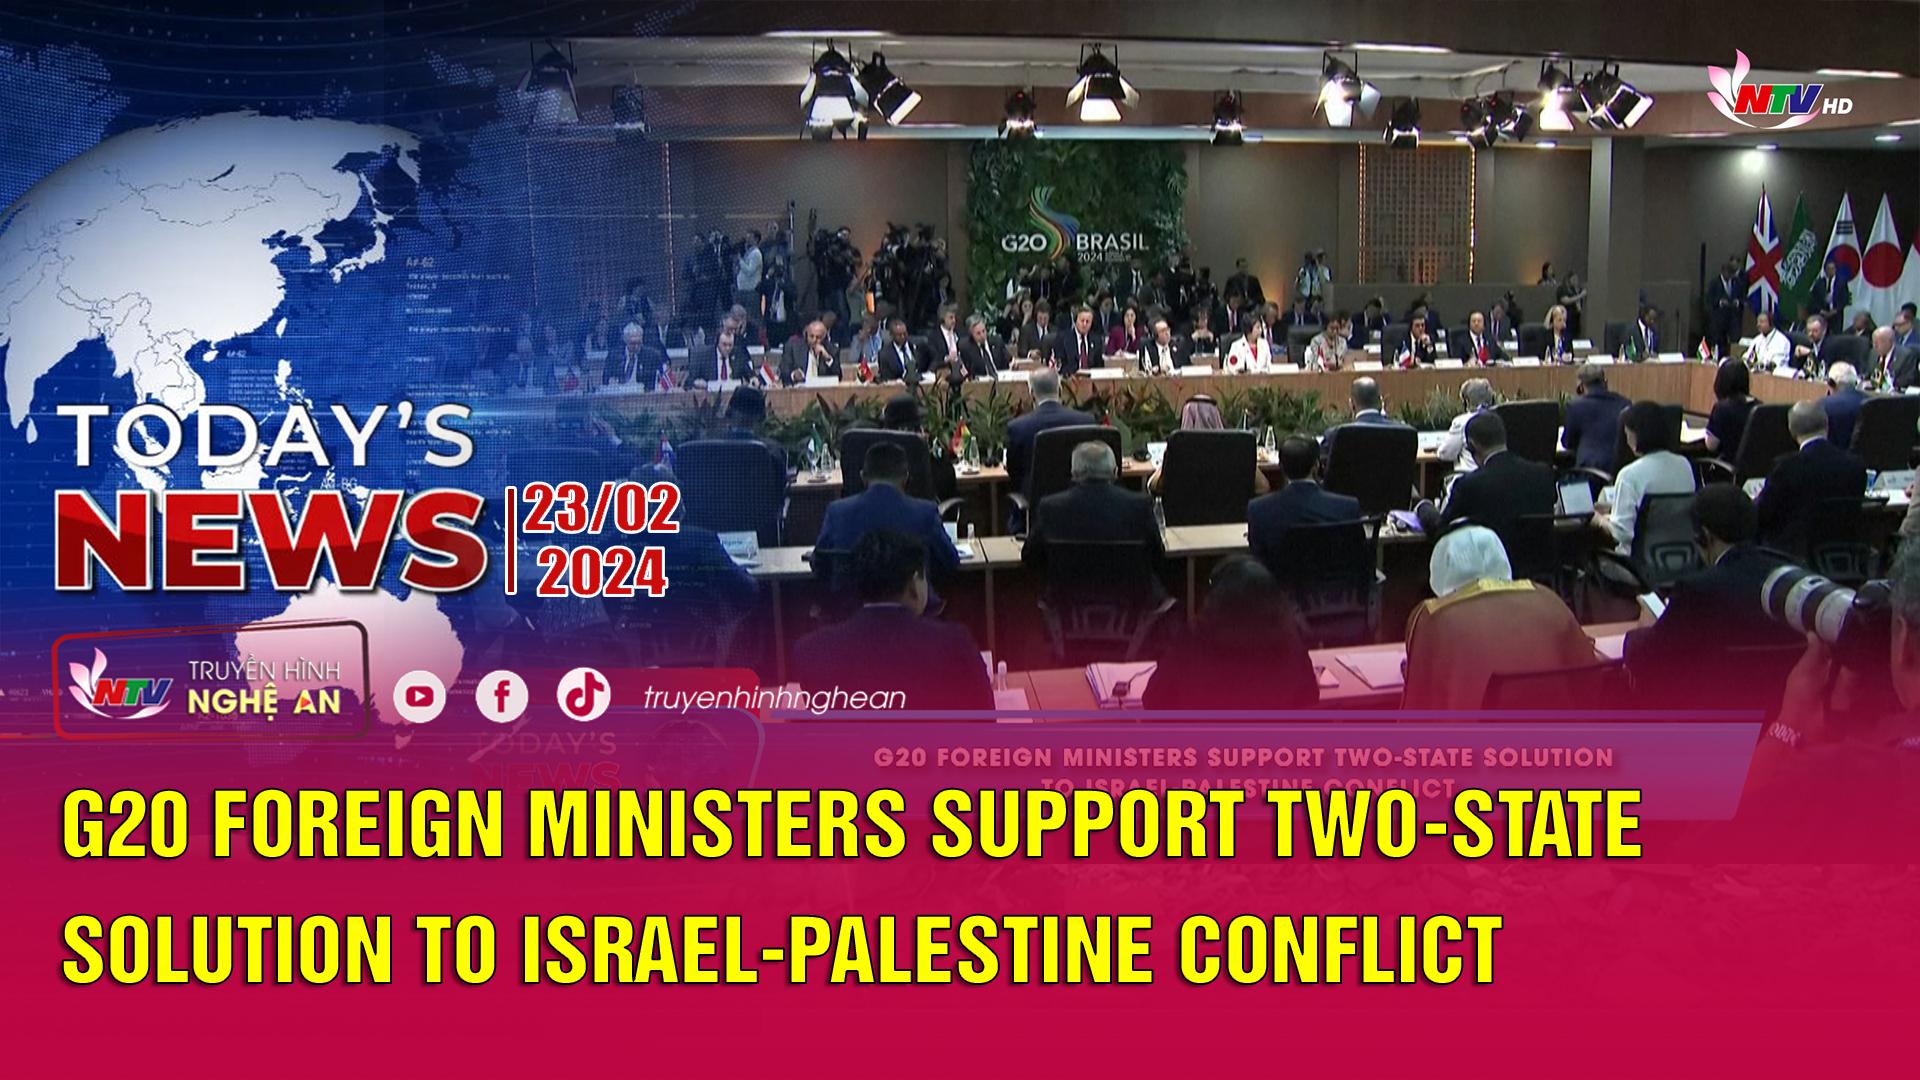 Today's News - 23/02/2024:  G20 foreign ministers support two-state solution to Israel-Palestine conflict